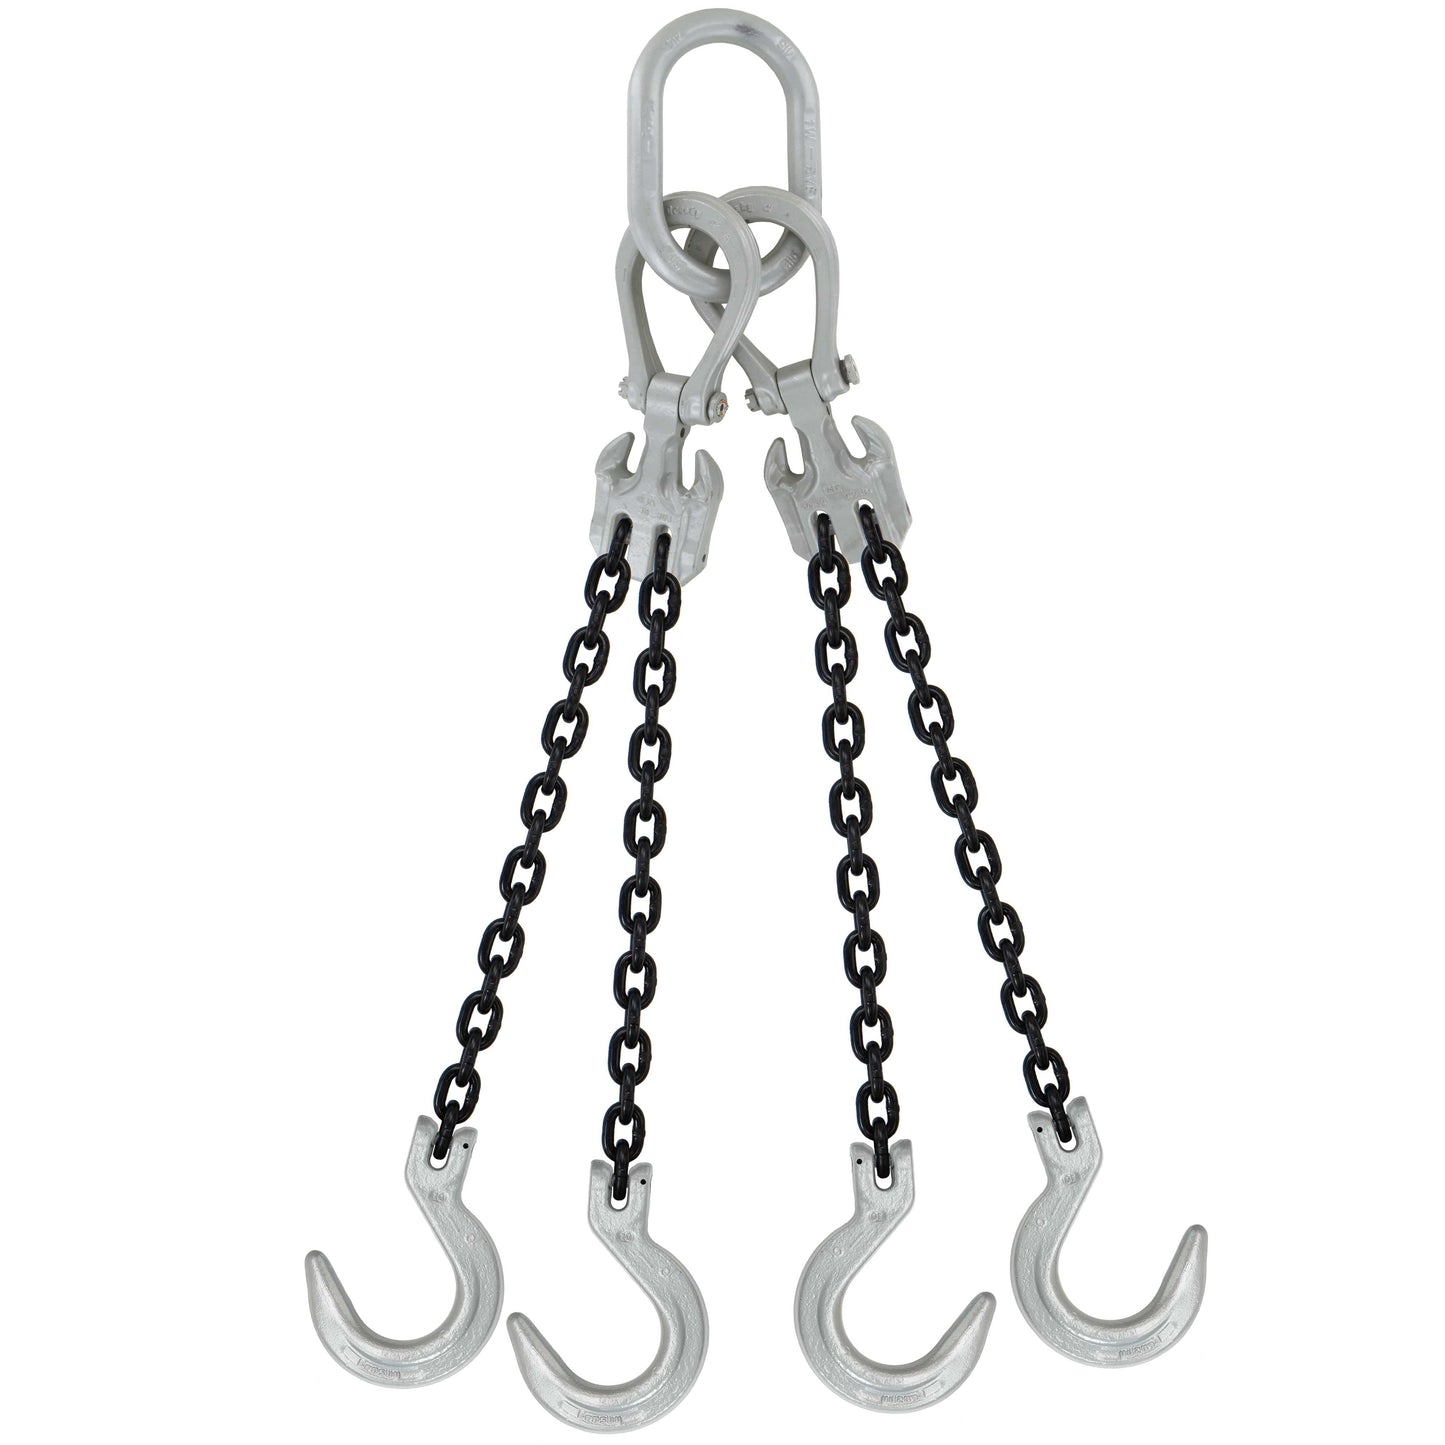 58 inch x 20 foot Domestic Adjustable 4 Leg Chain Sling w Crosby Foundry Hooks Grade 100 image 1 of 2